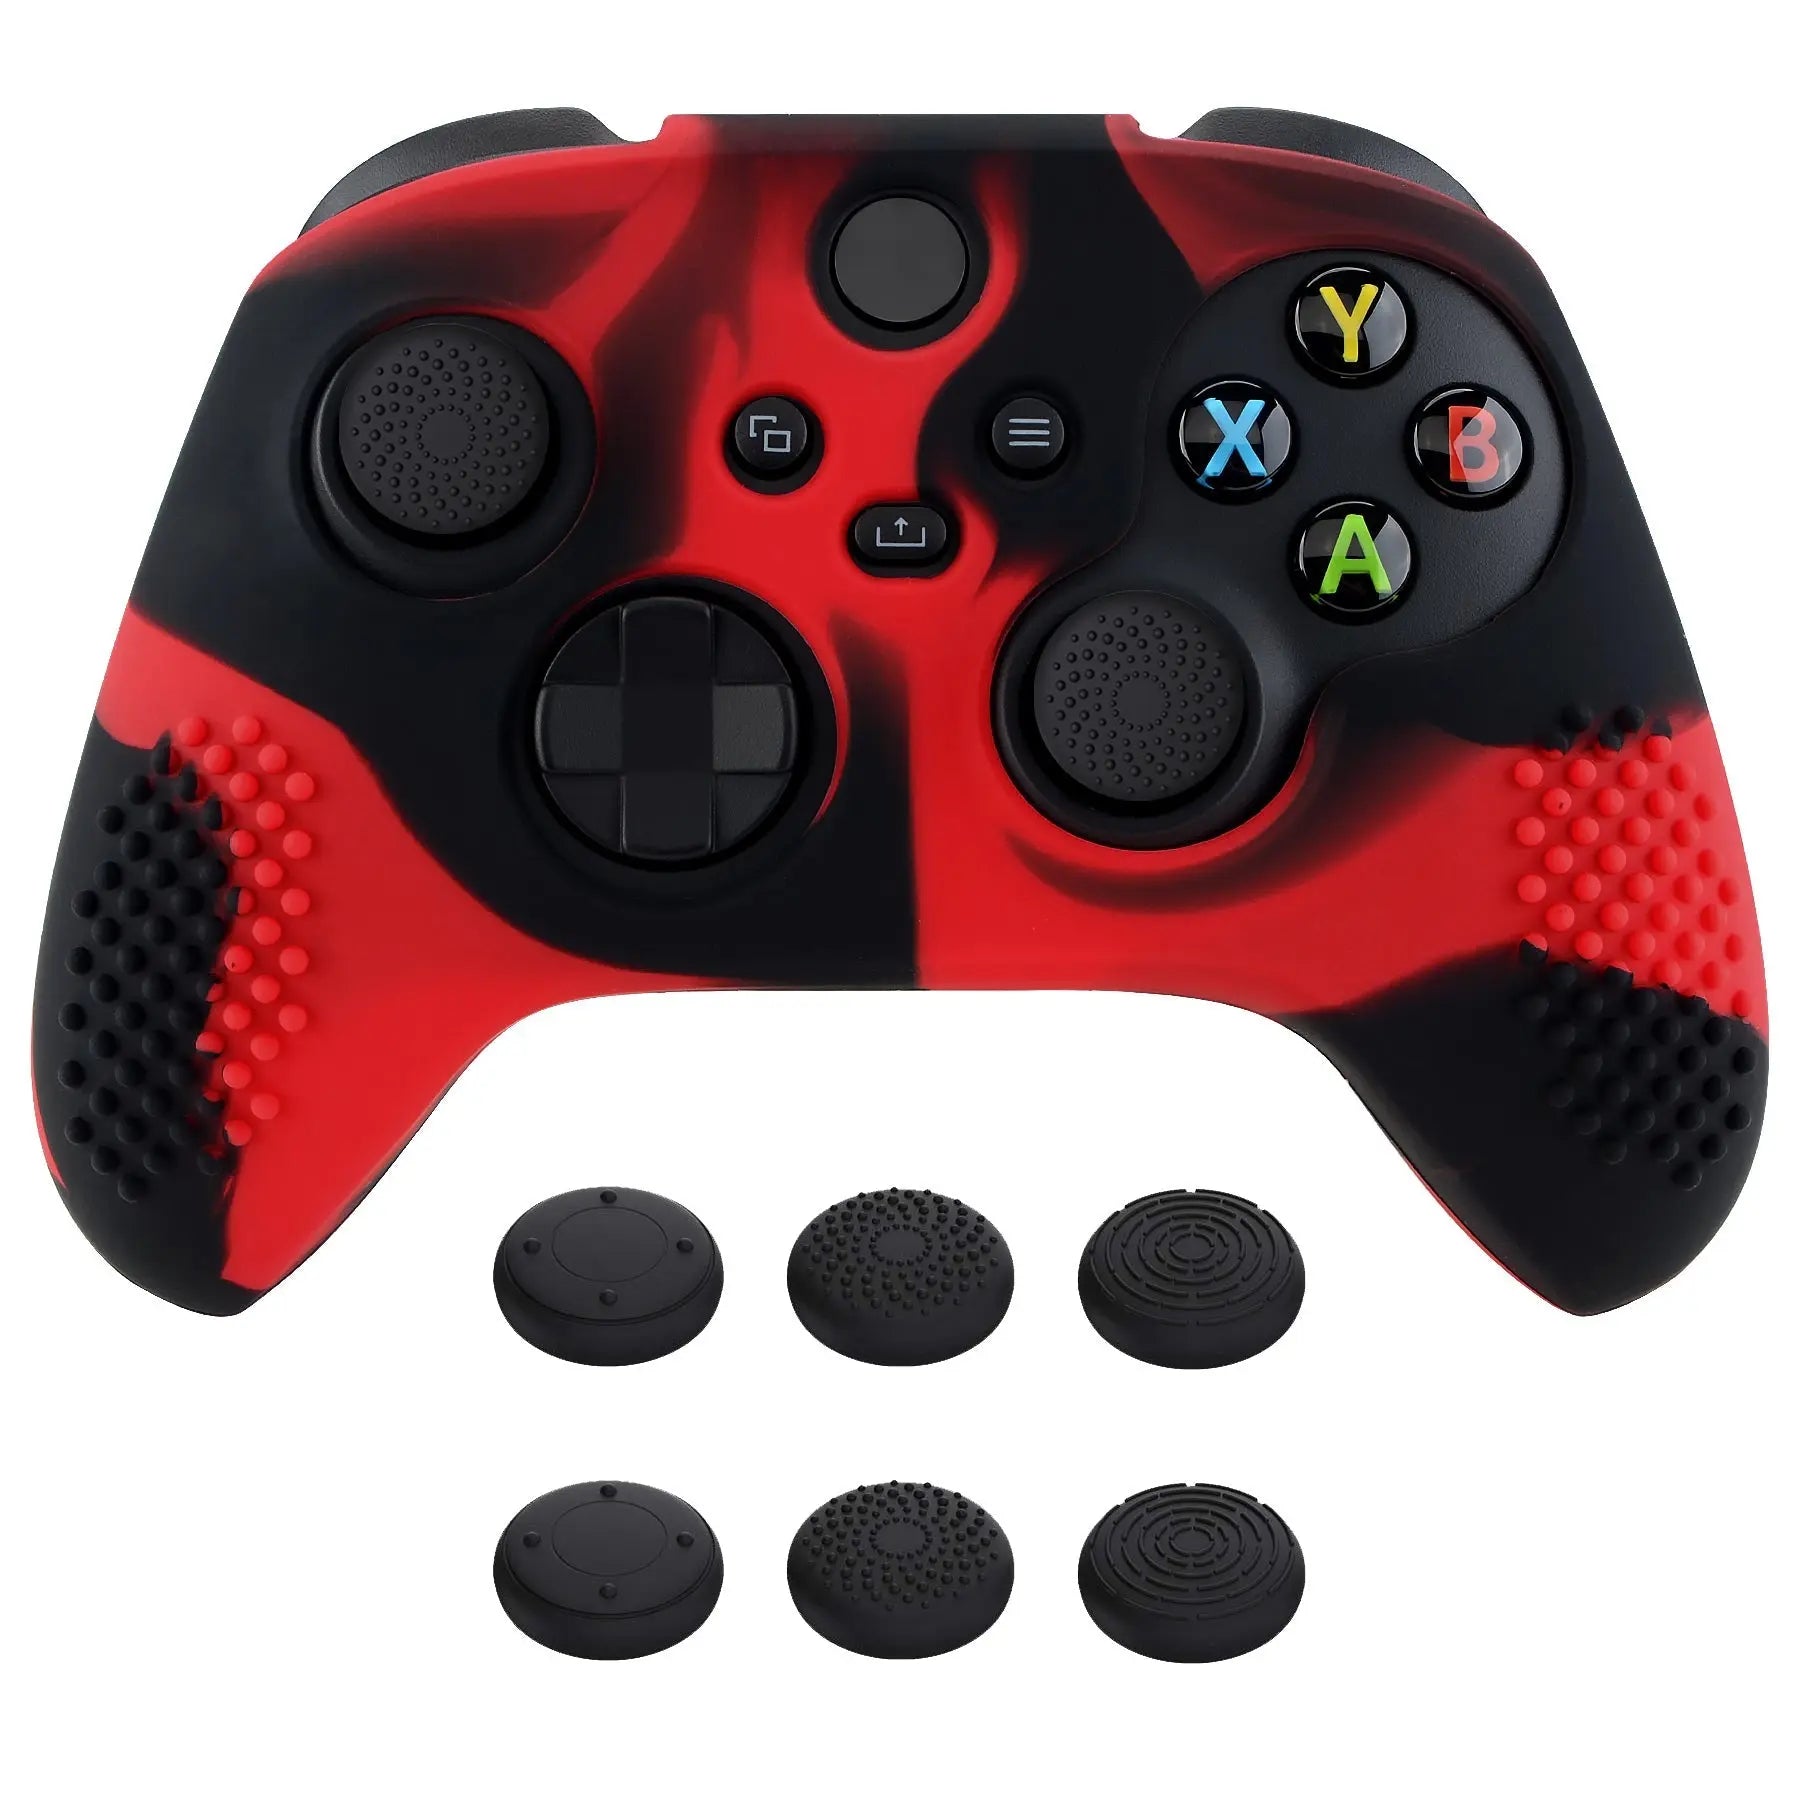 PlayVital Red & Black 3D Studded Edition Anti-slip Silicone Cover Skin for Xbox Series X Controller, Soft Rubber Case Protector for Xbox Series S Controller with 6 Black Thumb Grip Caps - SDX3016 PlayVital